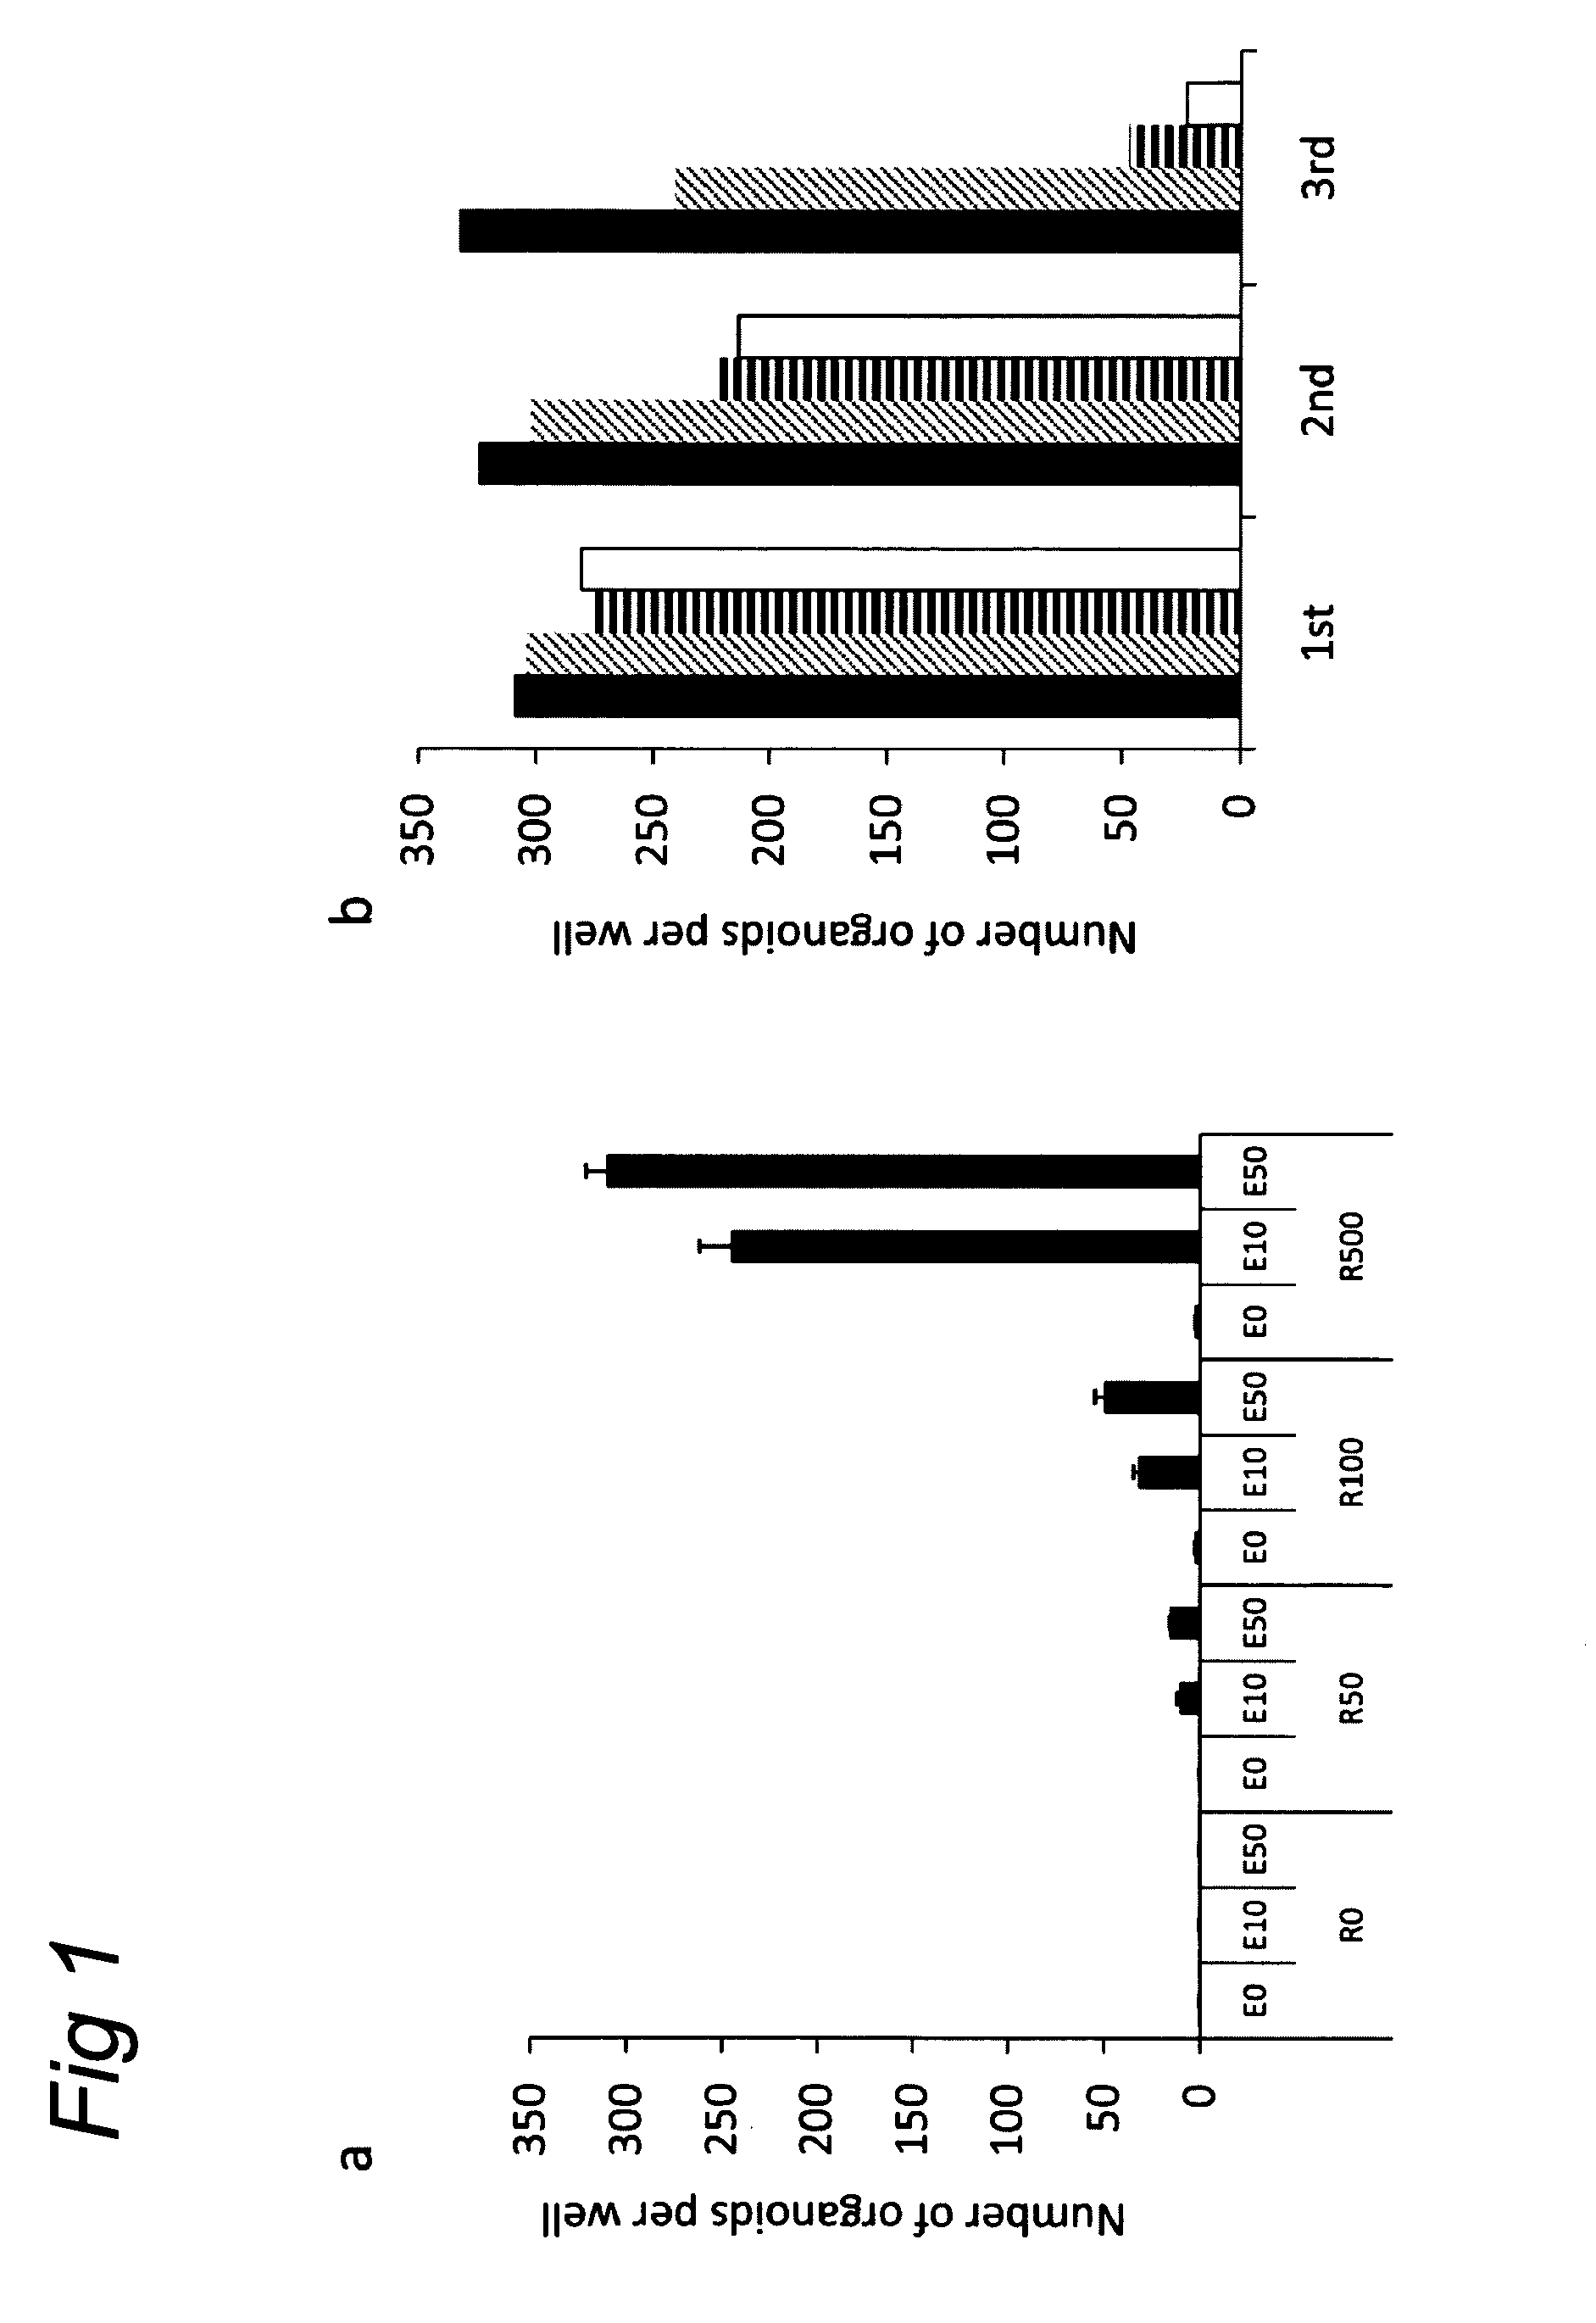 Culture medium for epithelial stem cells and organoids comprising the stem cells